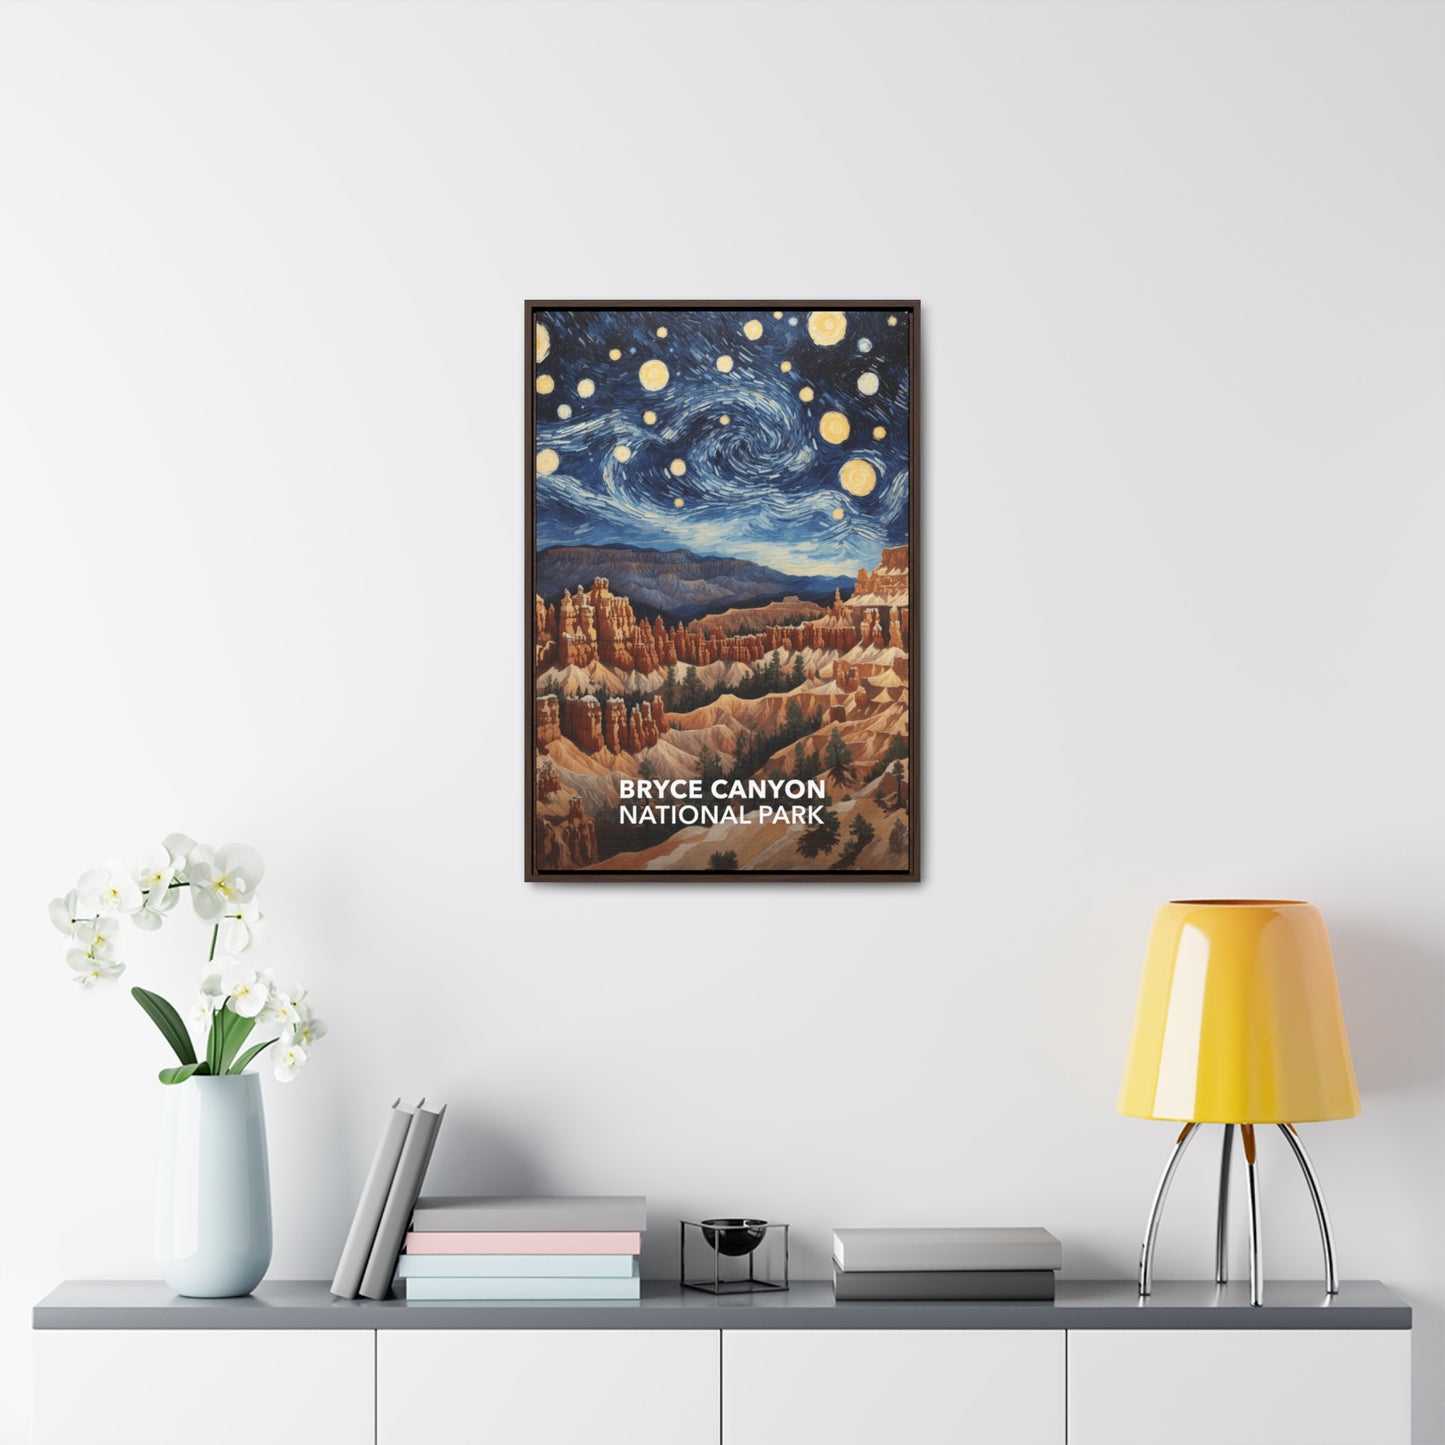 Bryce Canyon National Park Framed Canvas - The Starry Night